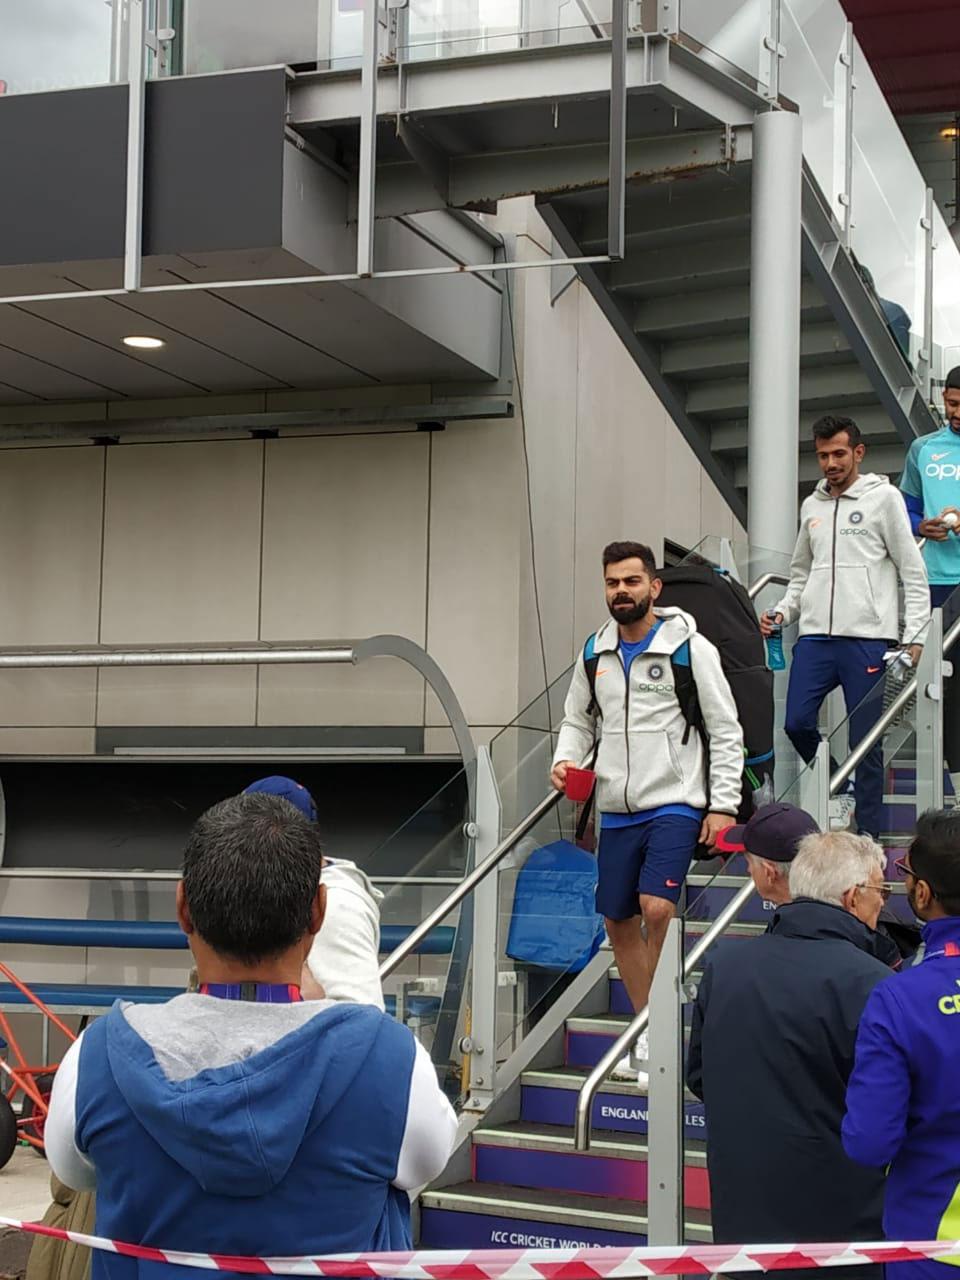 Team captain Virat Kohli looking determined to boost his fitness in the training session at Manchester. Manchester is a city most famous for its footballing culture and history. 